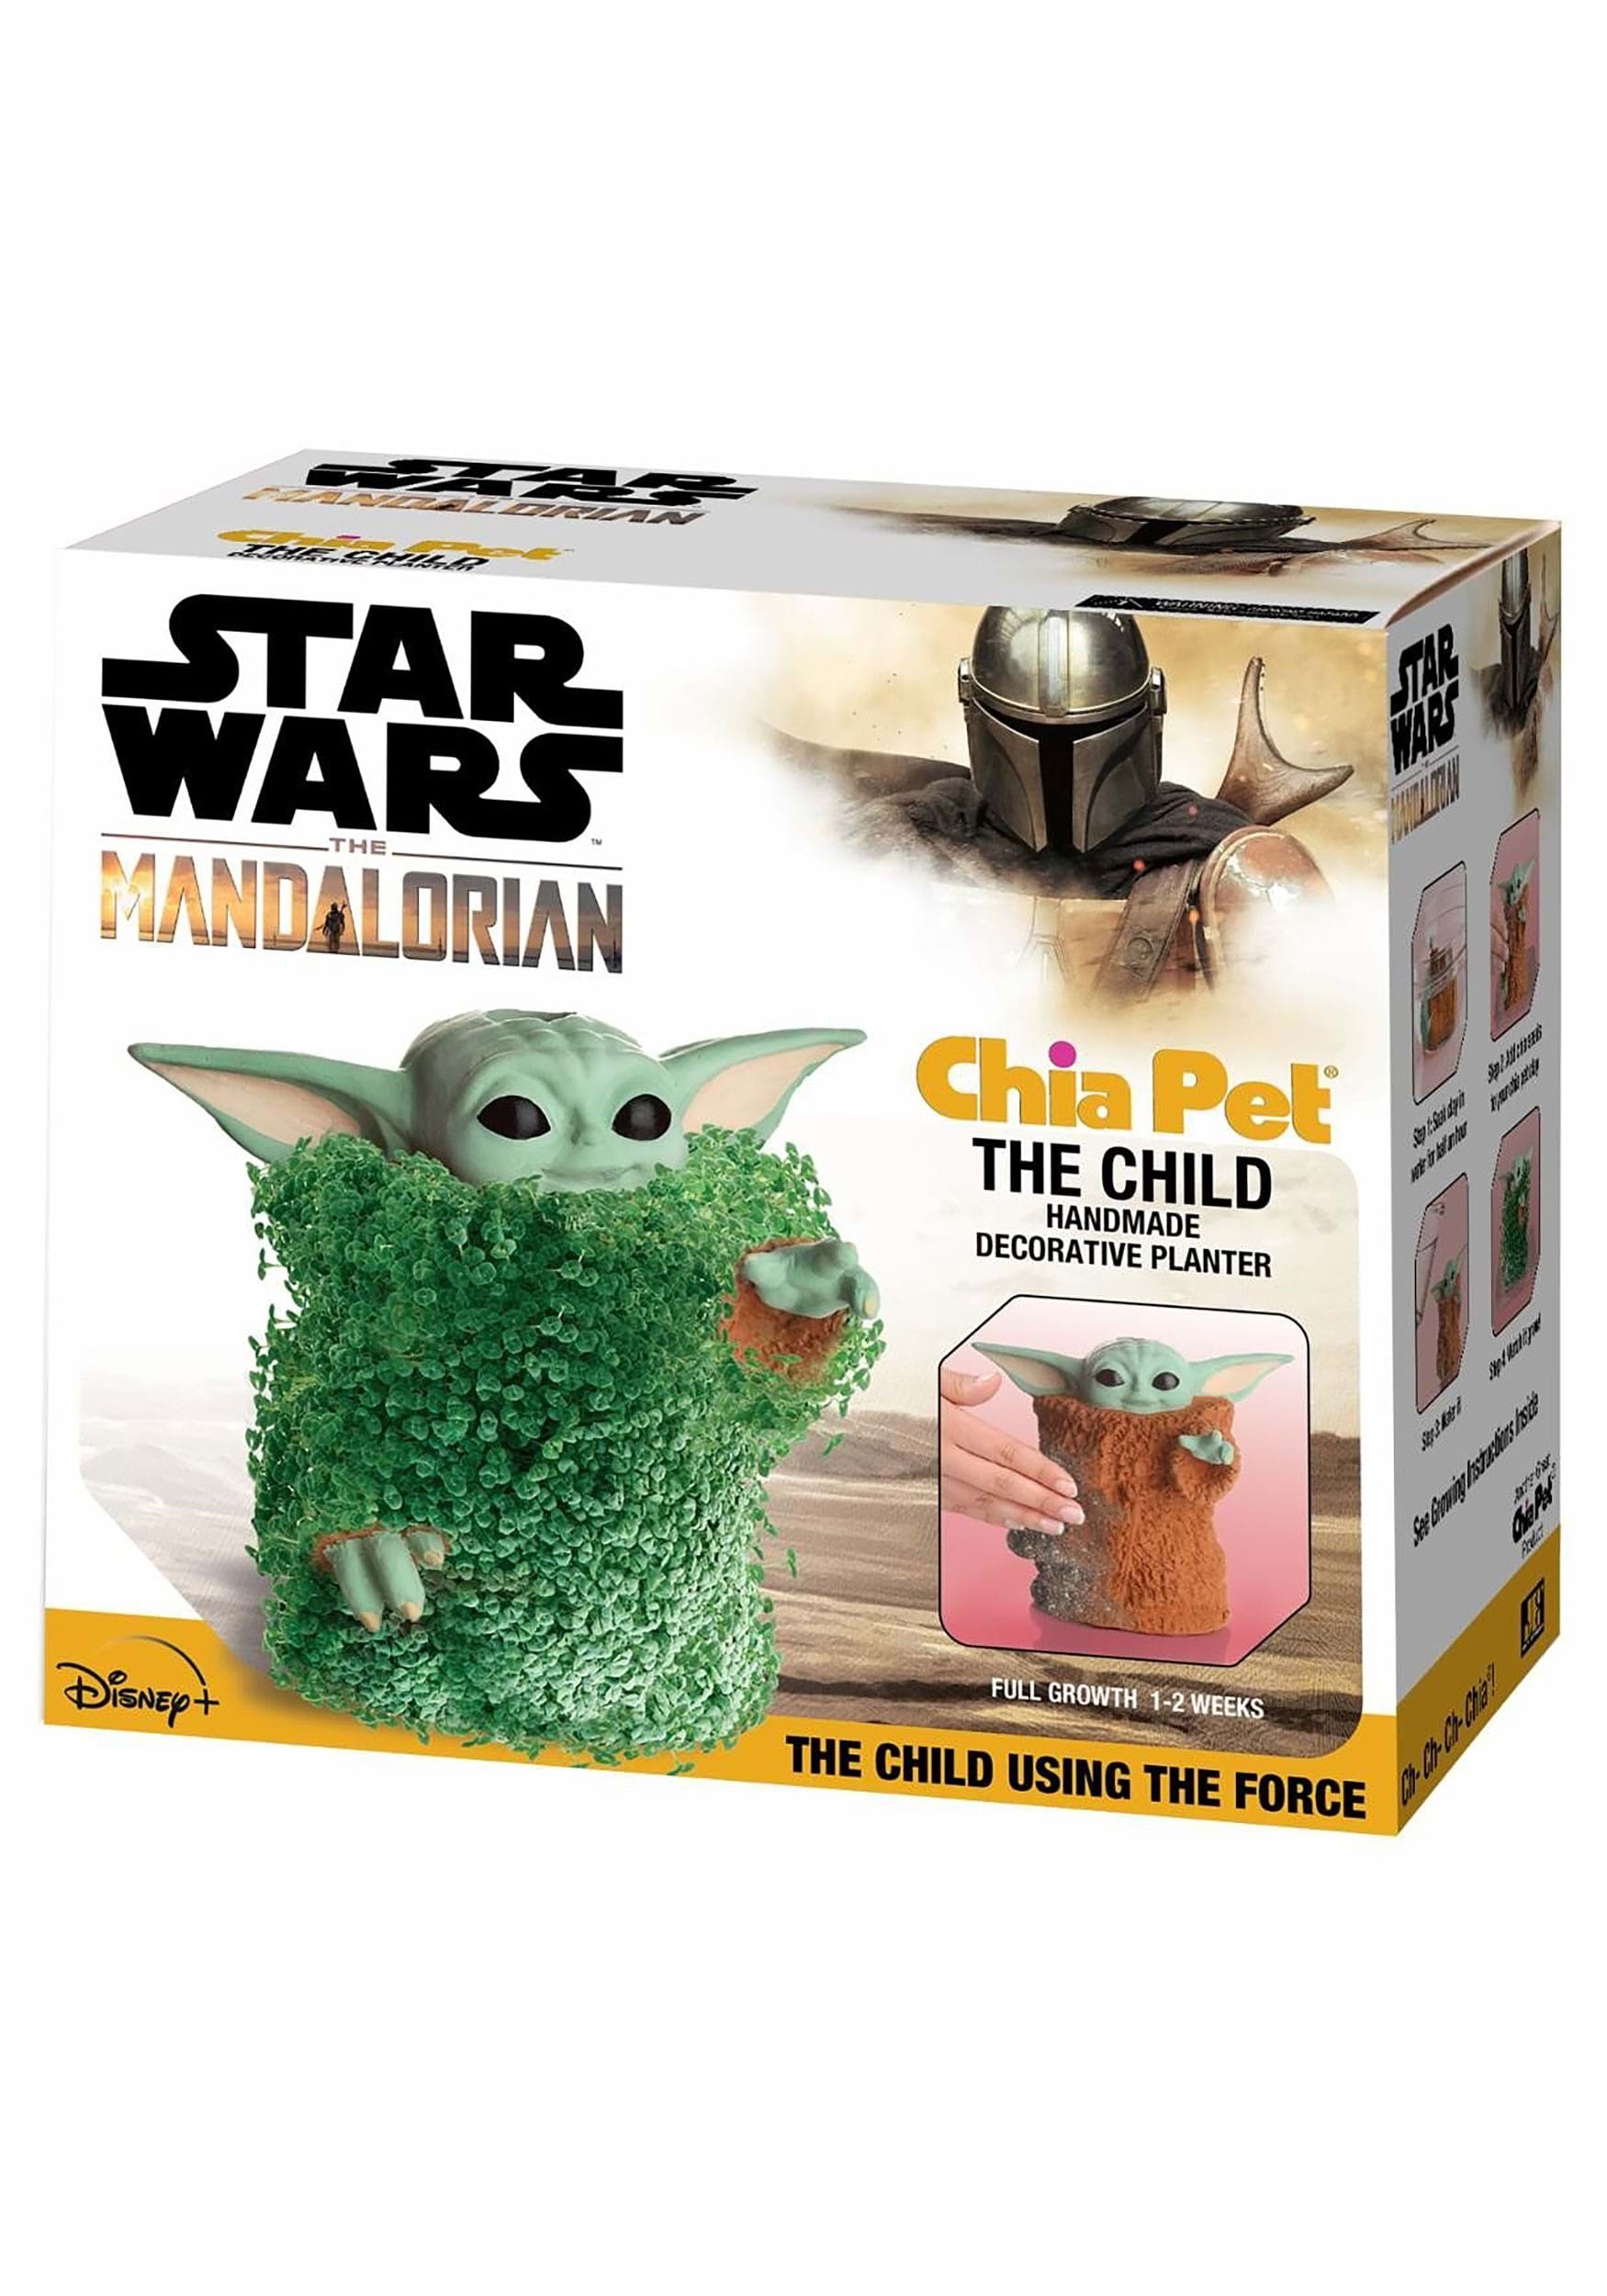 The Child Chia Pet from The Mandalorian